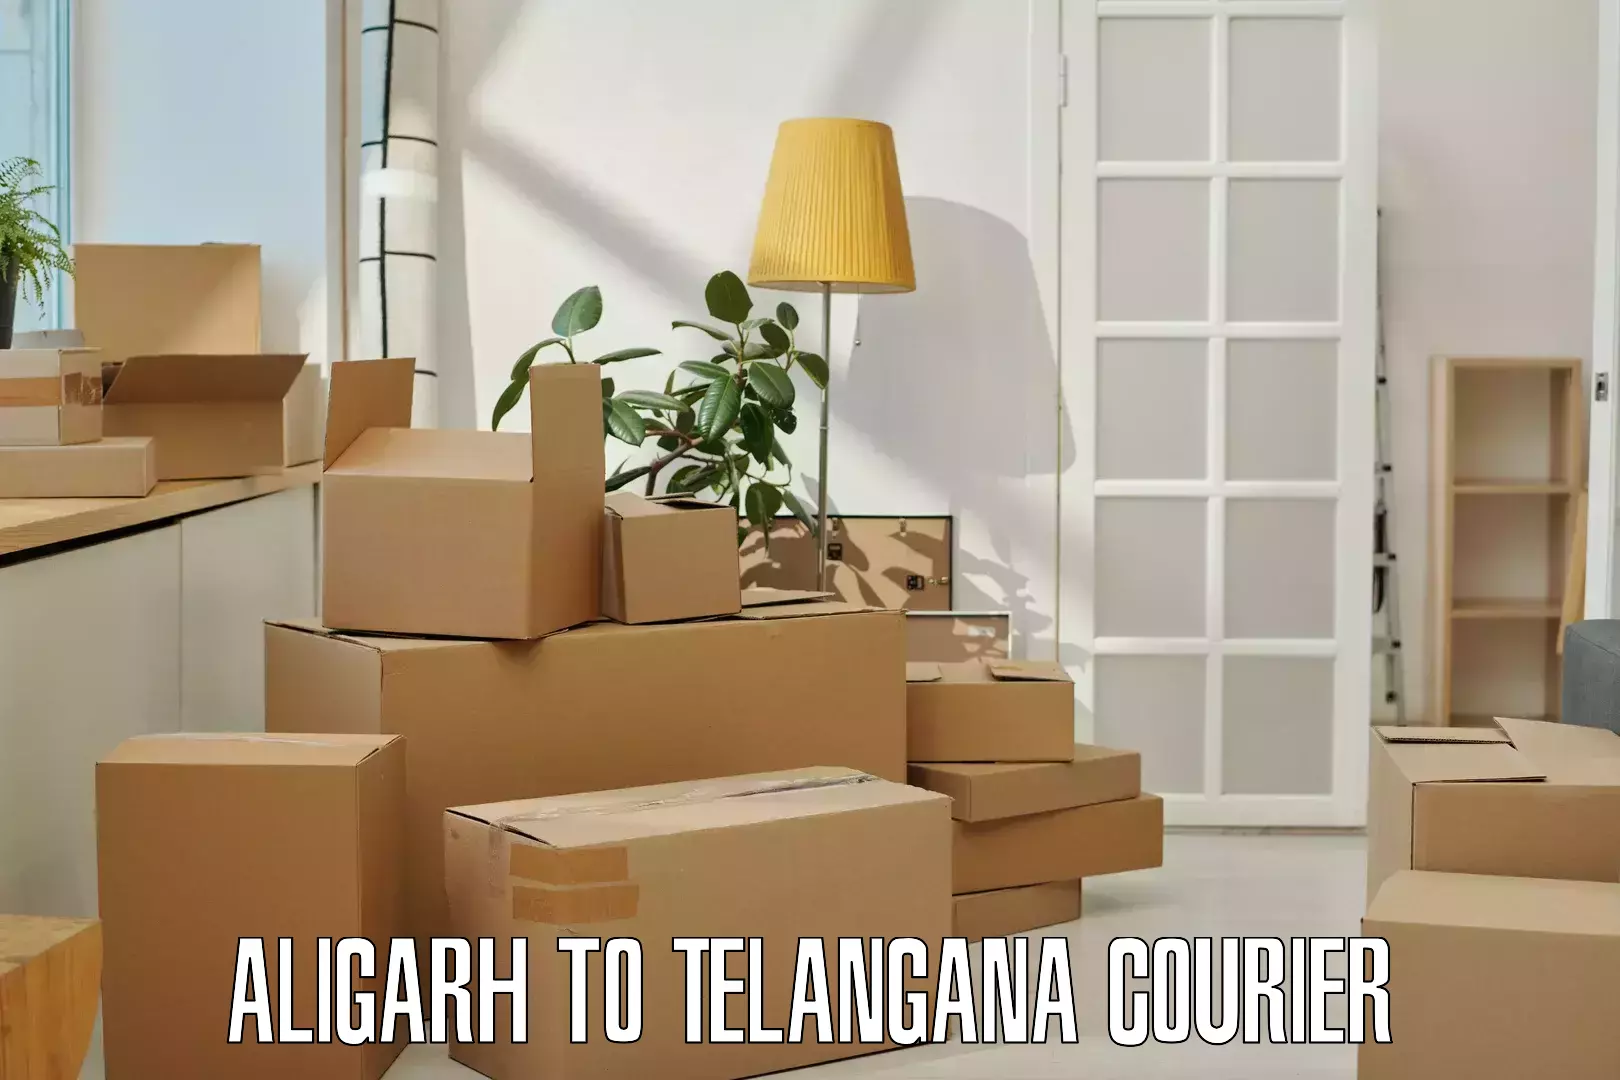 Global courier networks Aligarh to Ghanpur